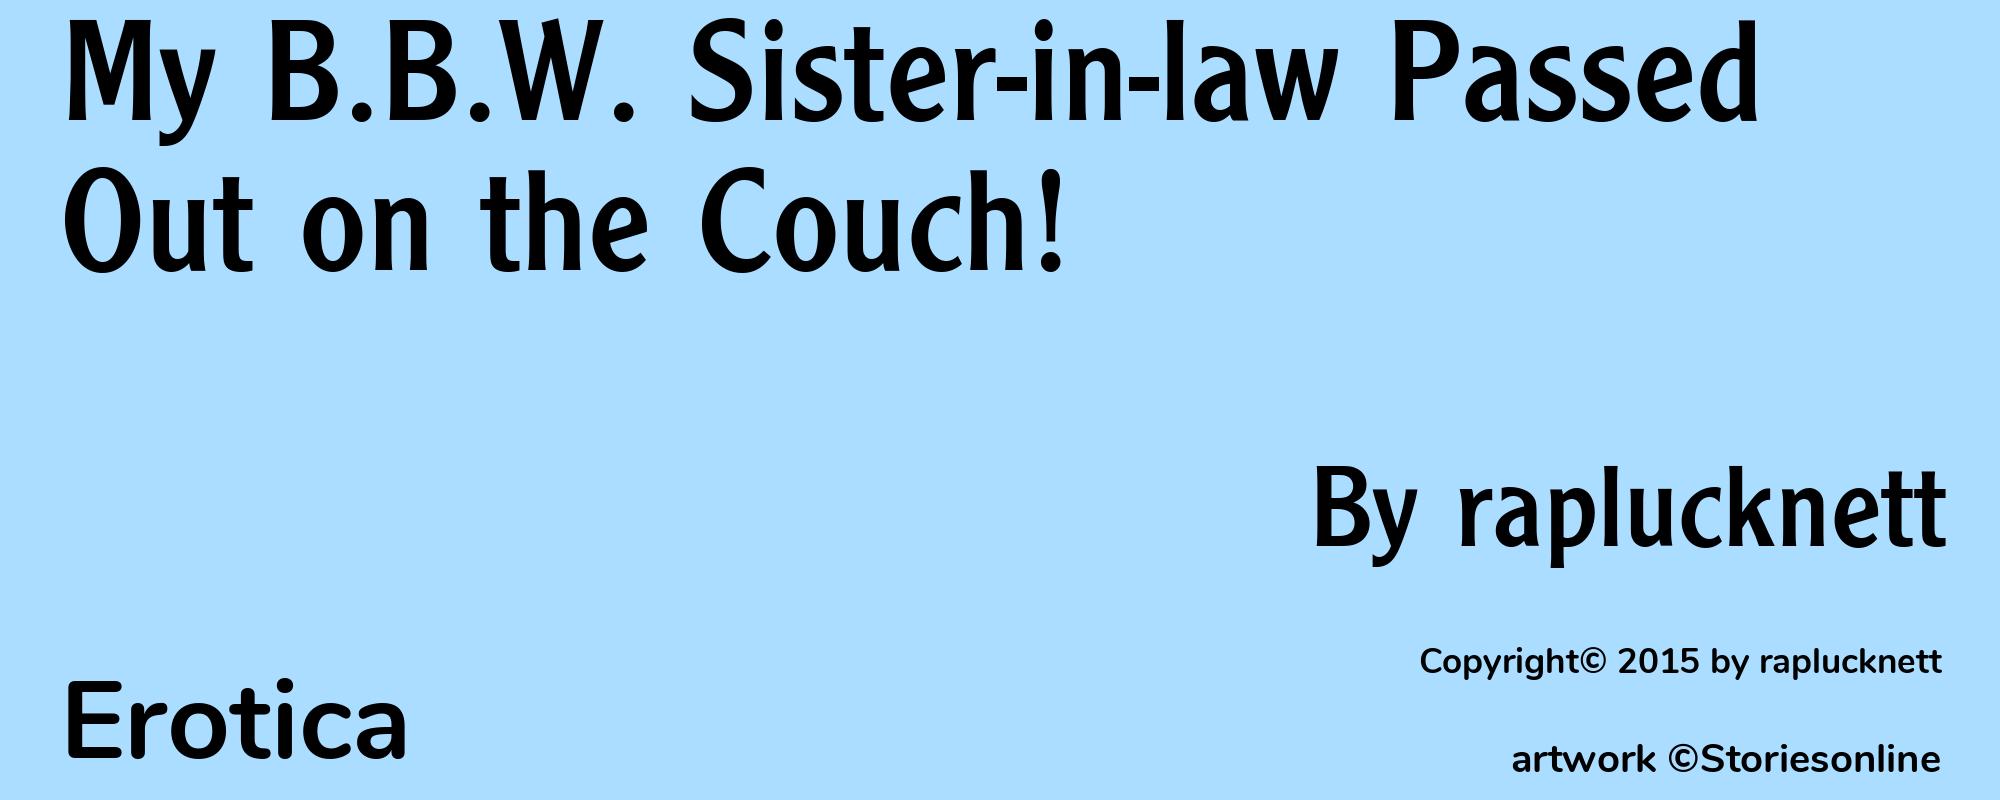 My B.B.W. Sister-in-law Passed Out on the Couch! - Cover